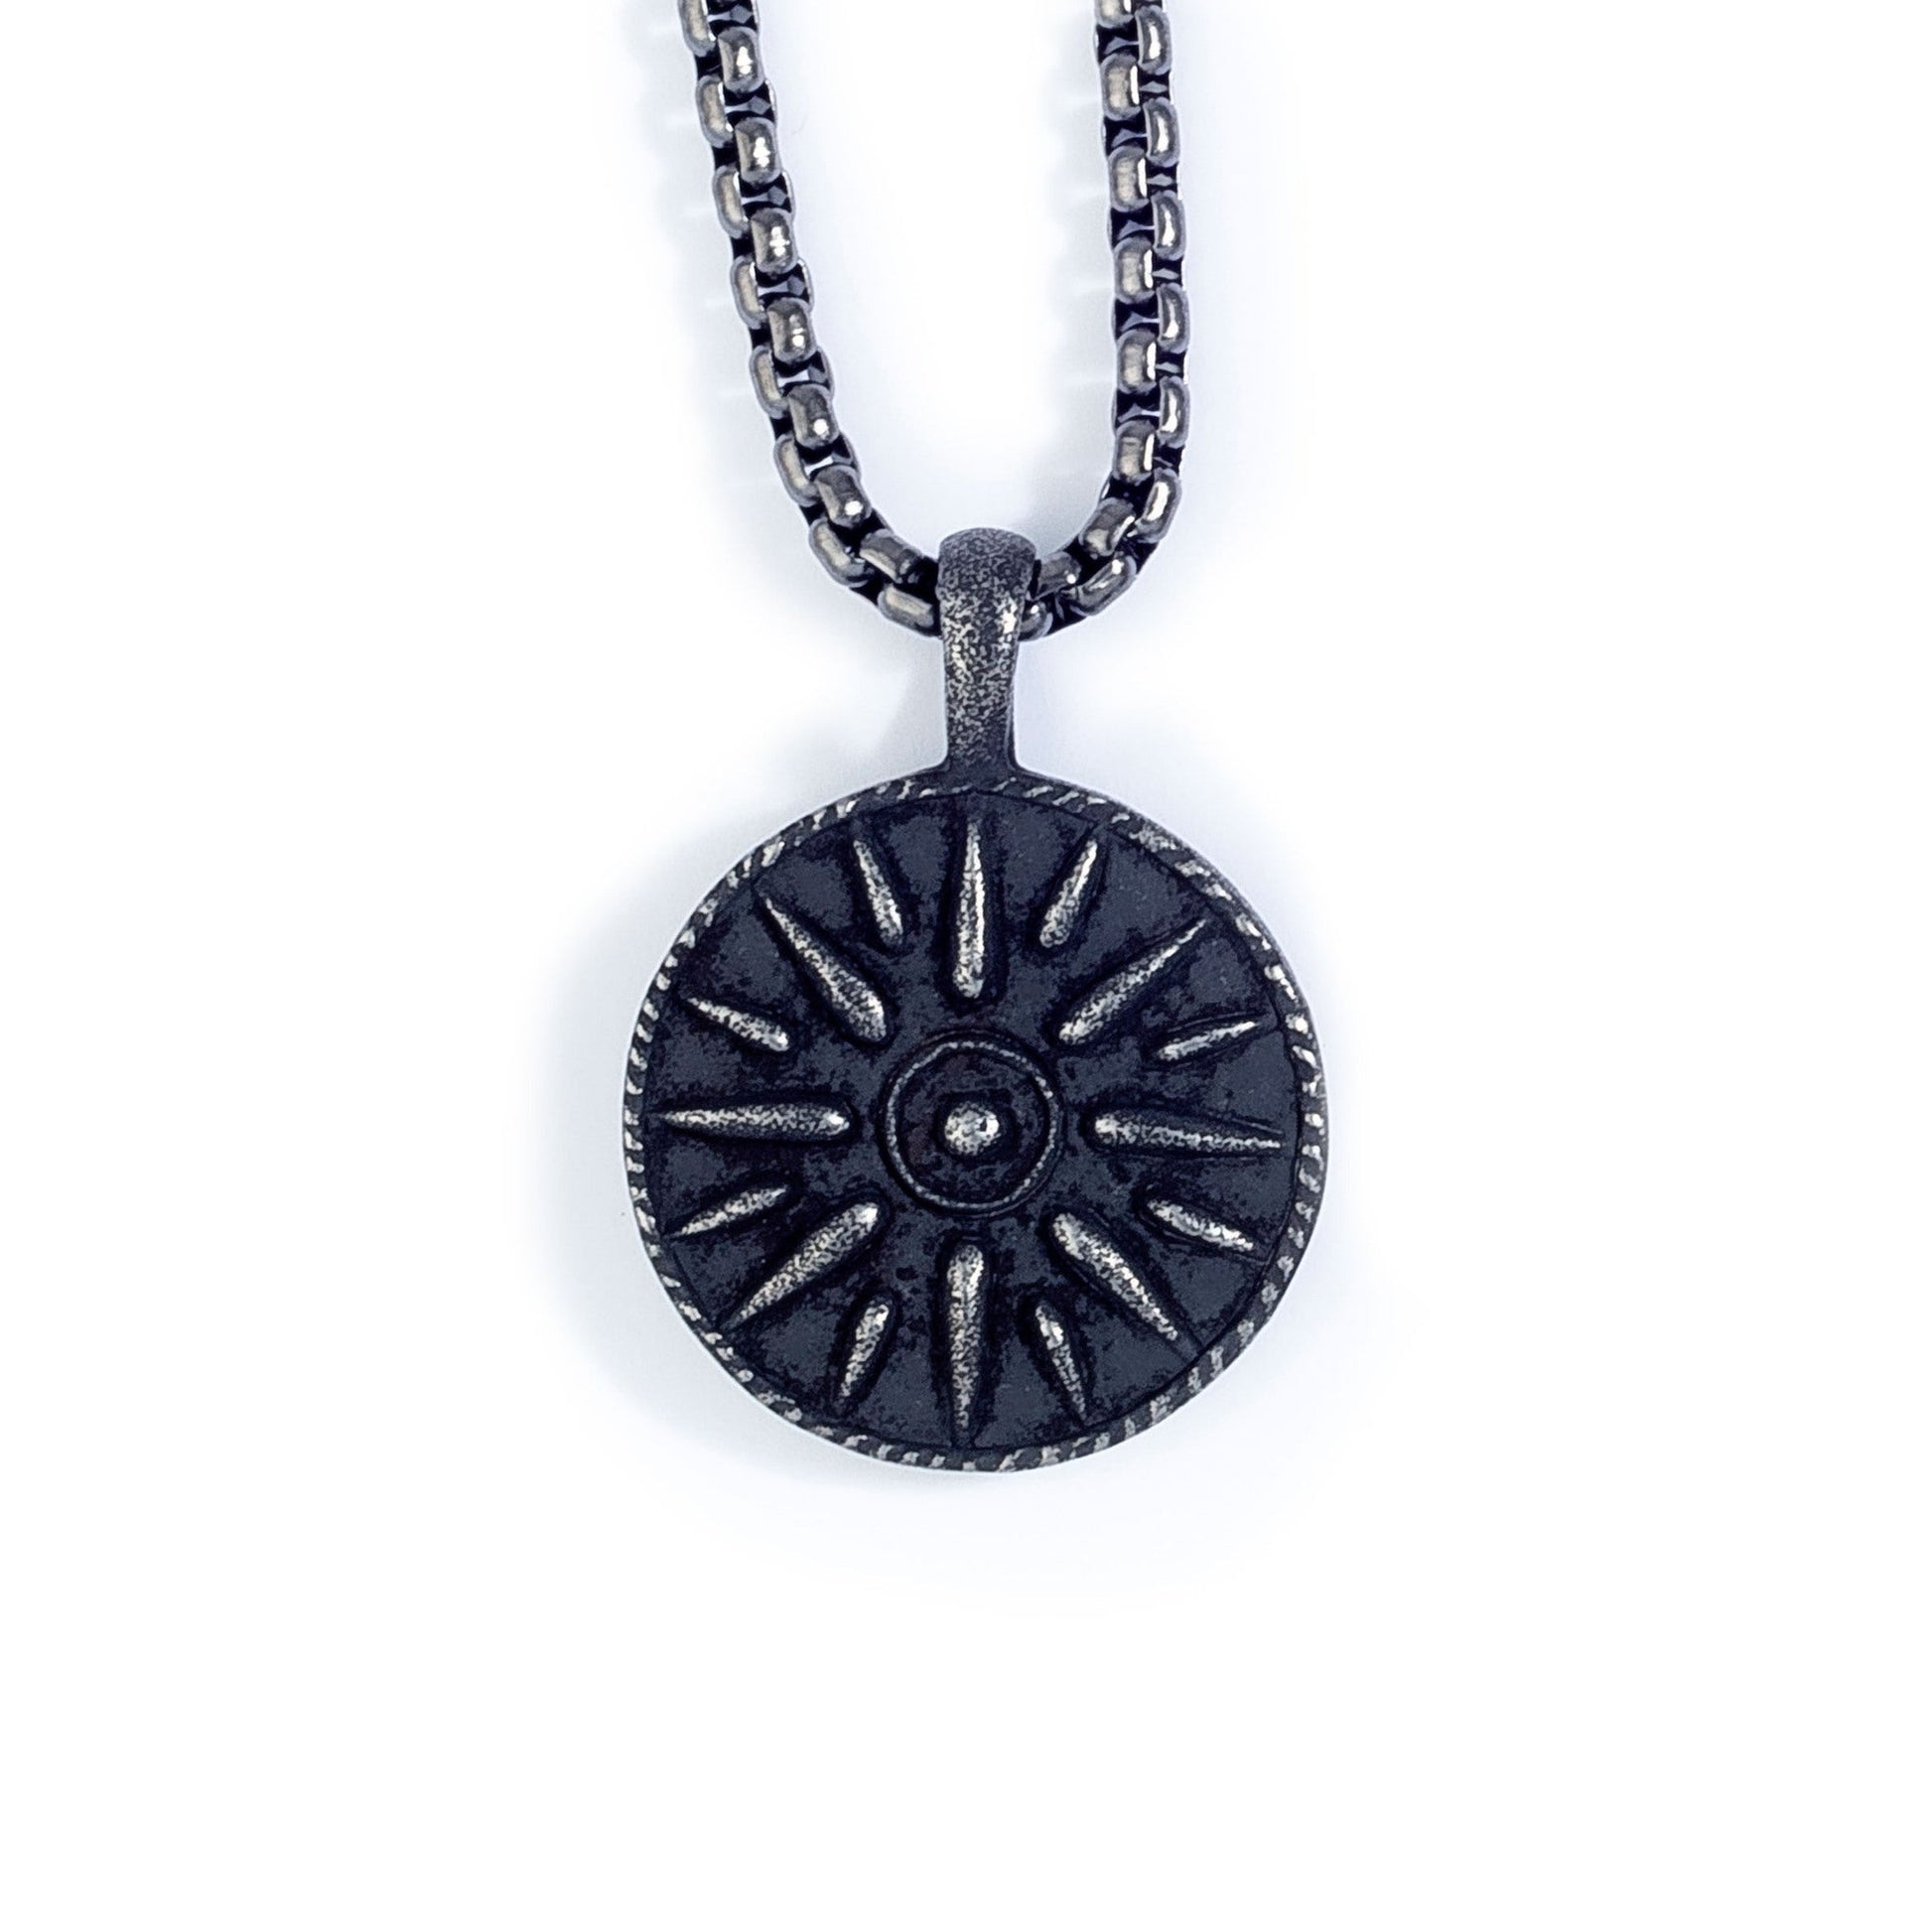 A black stainless steel compass medallion on chain displayed on a neutral white background.